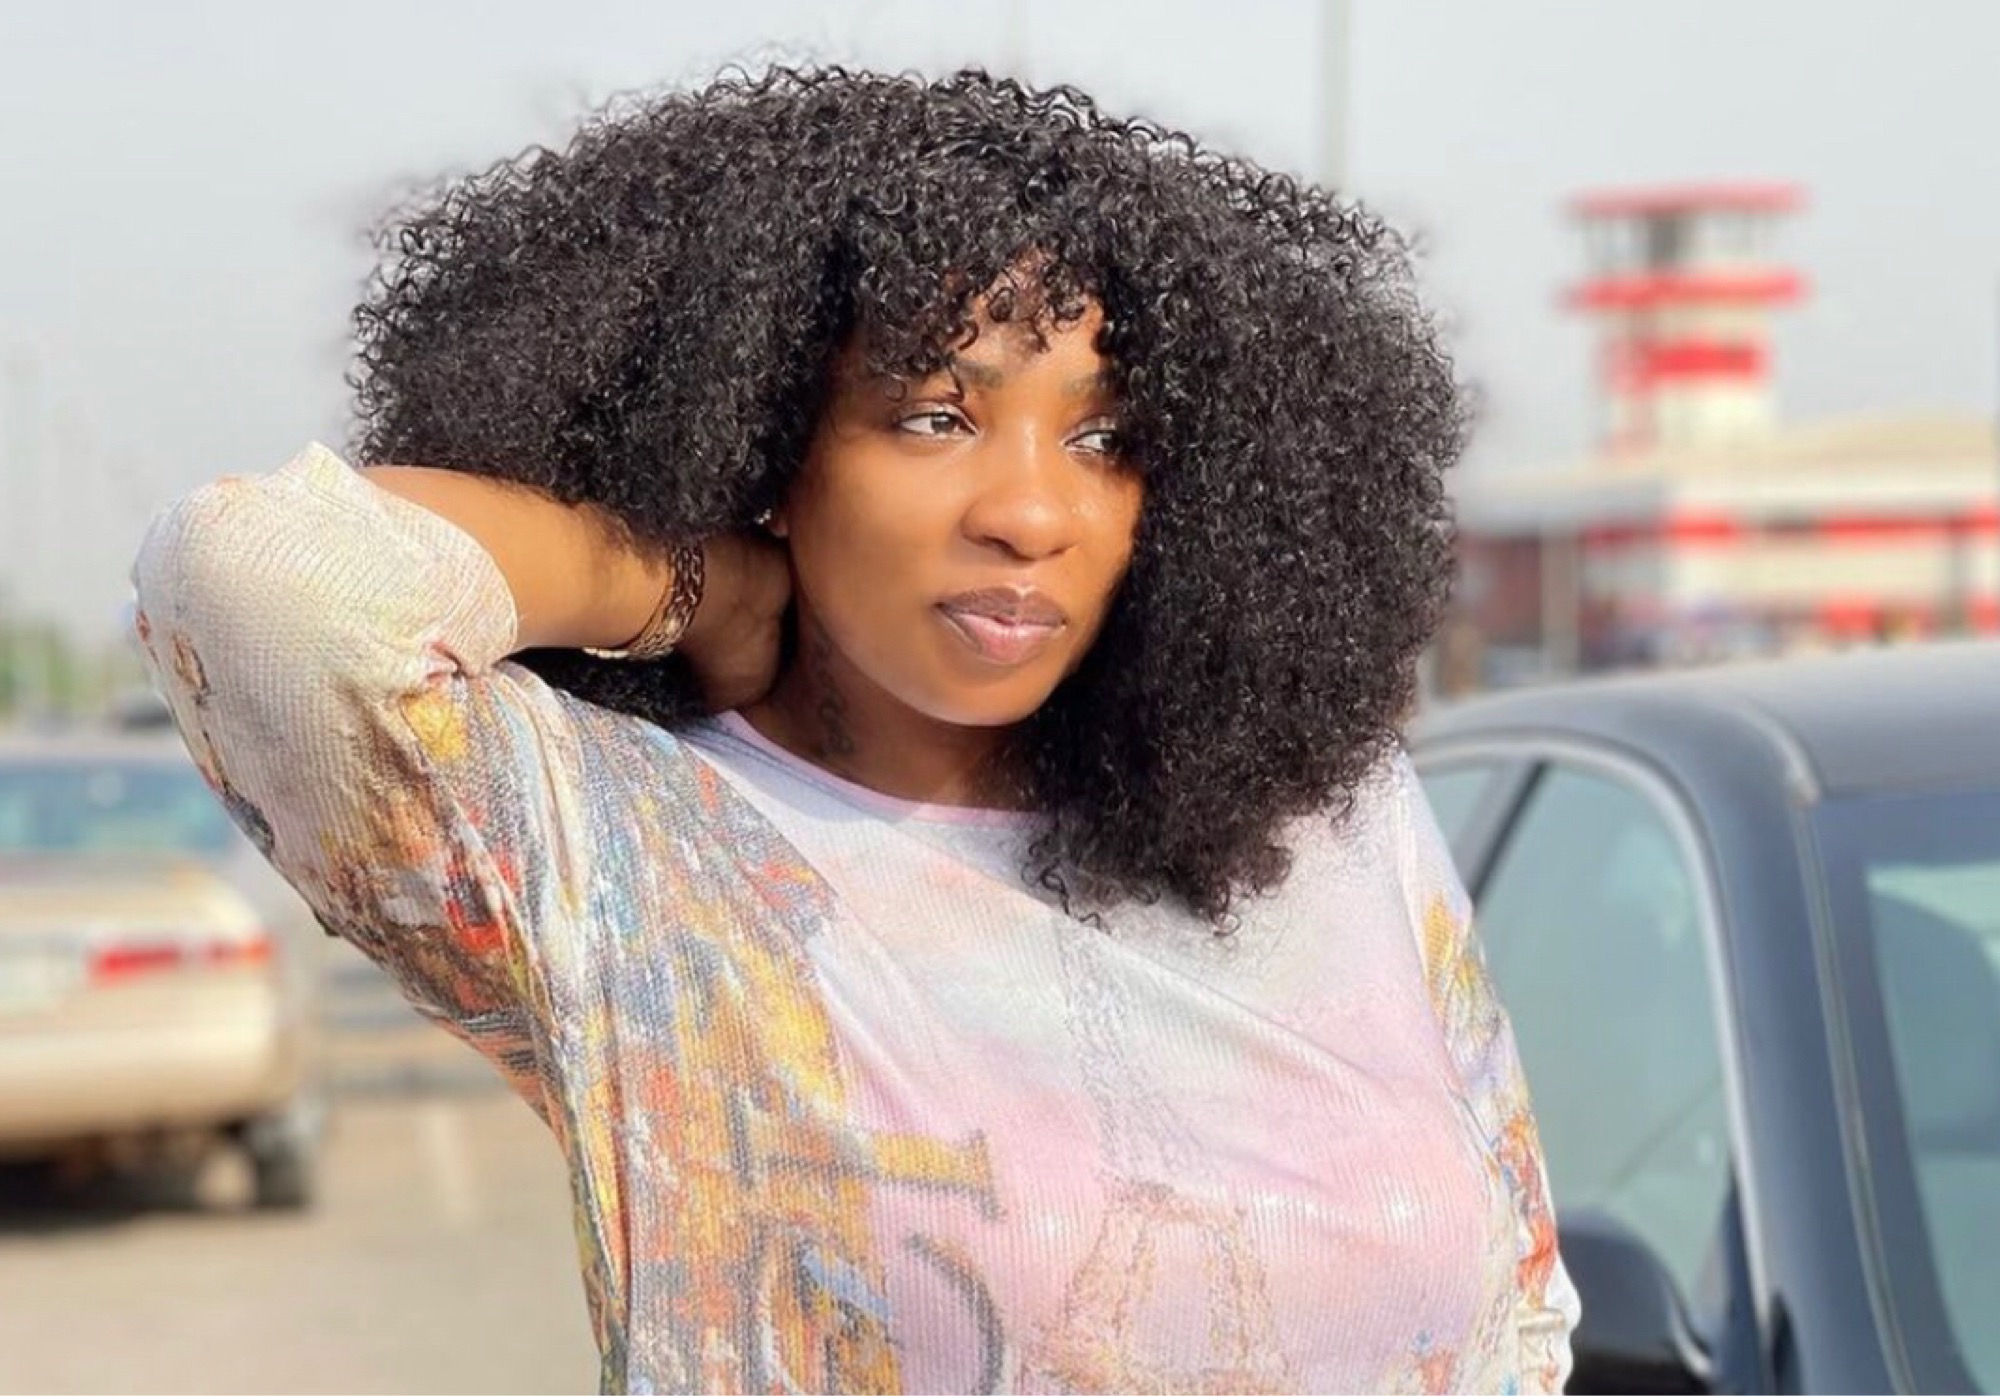 “You Mustn’t Have A Man But You Need One” — Actress Anita Joseph Tells Women